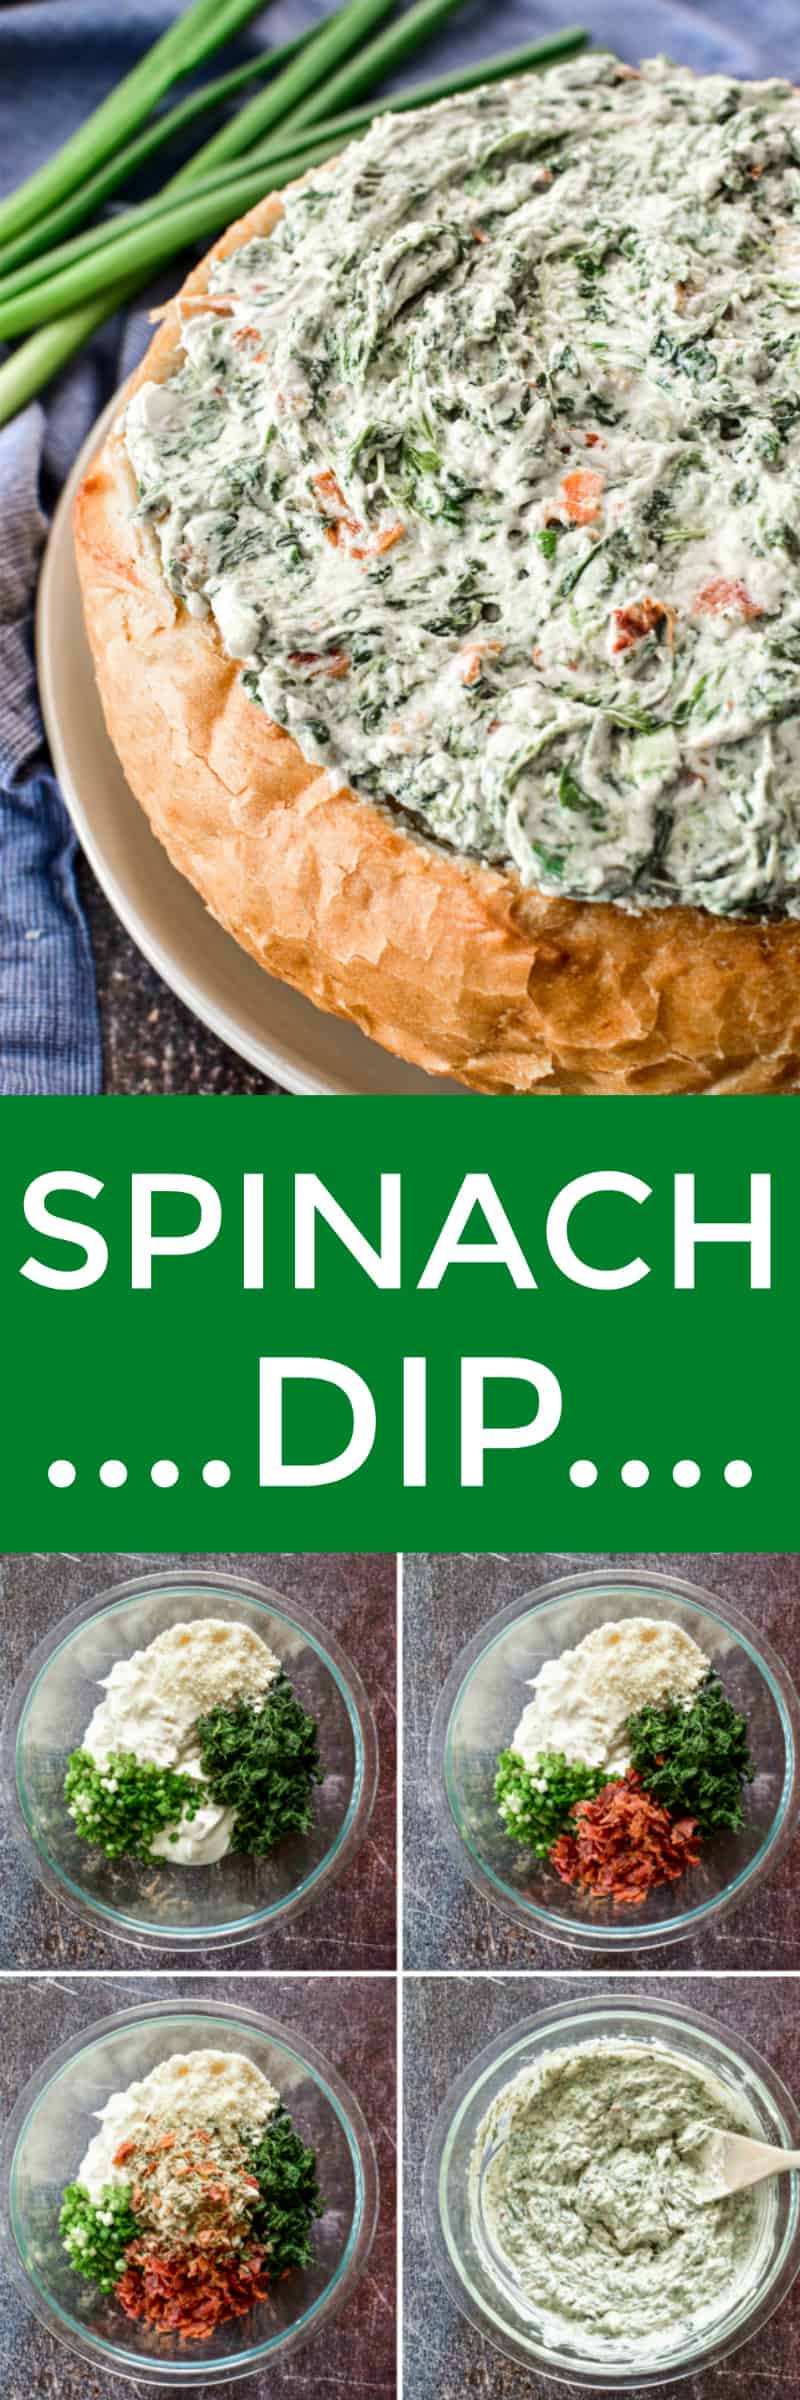 Spinach Dip collage 